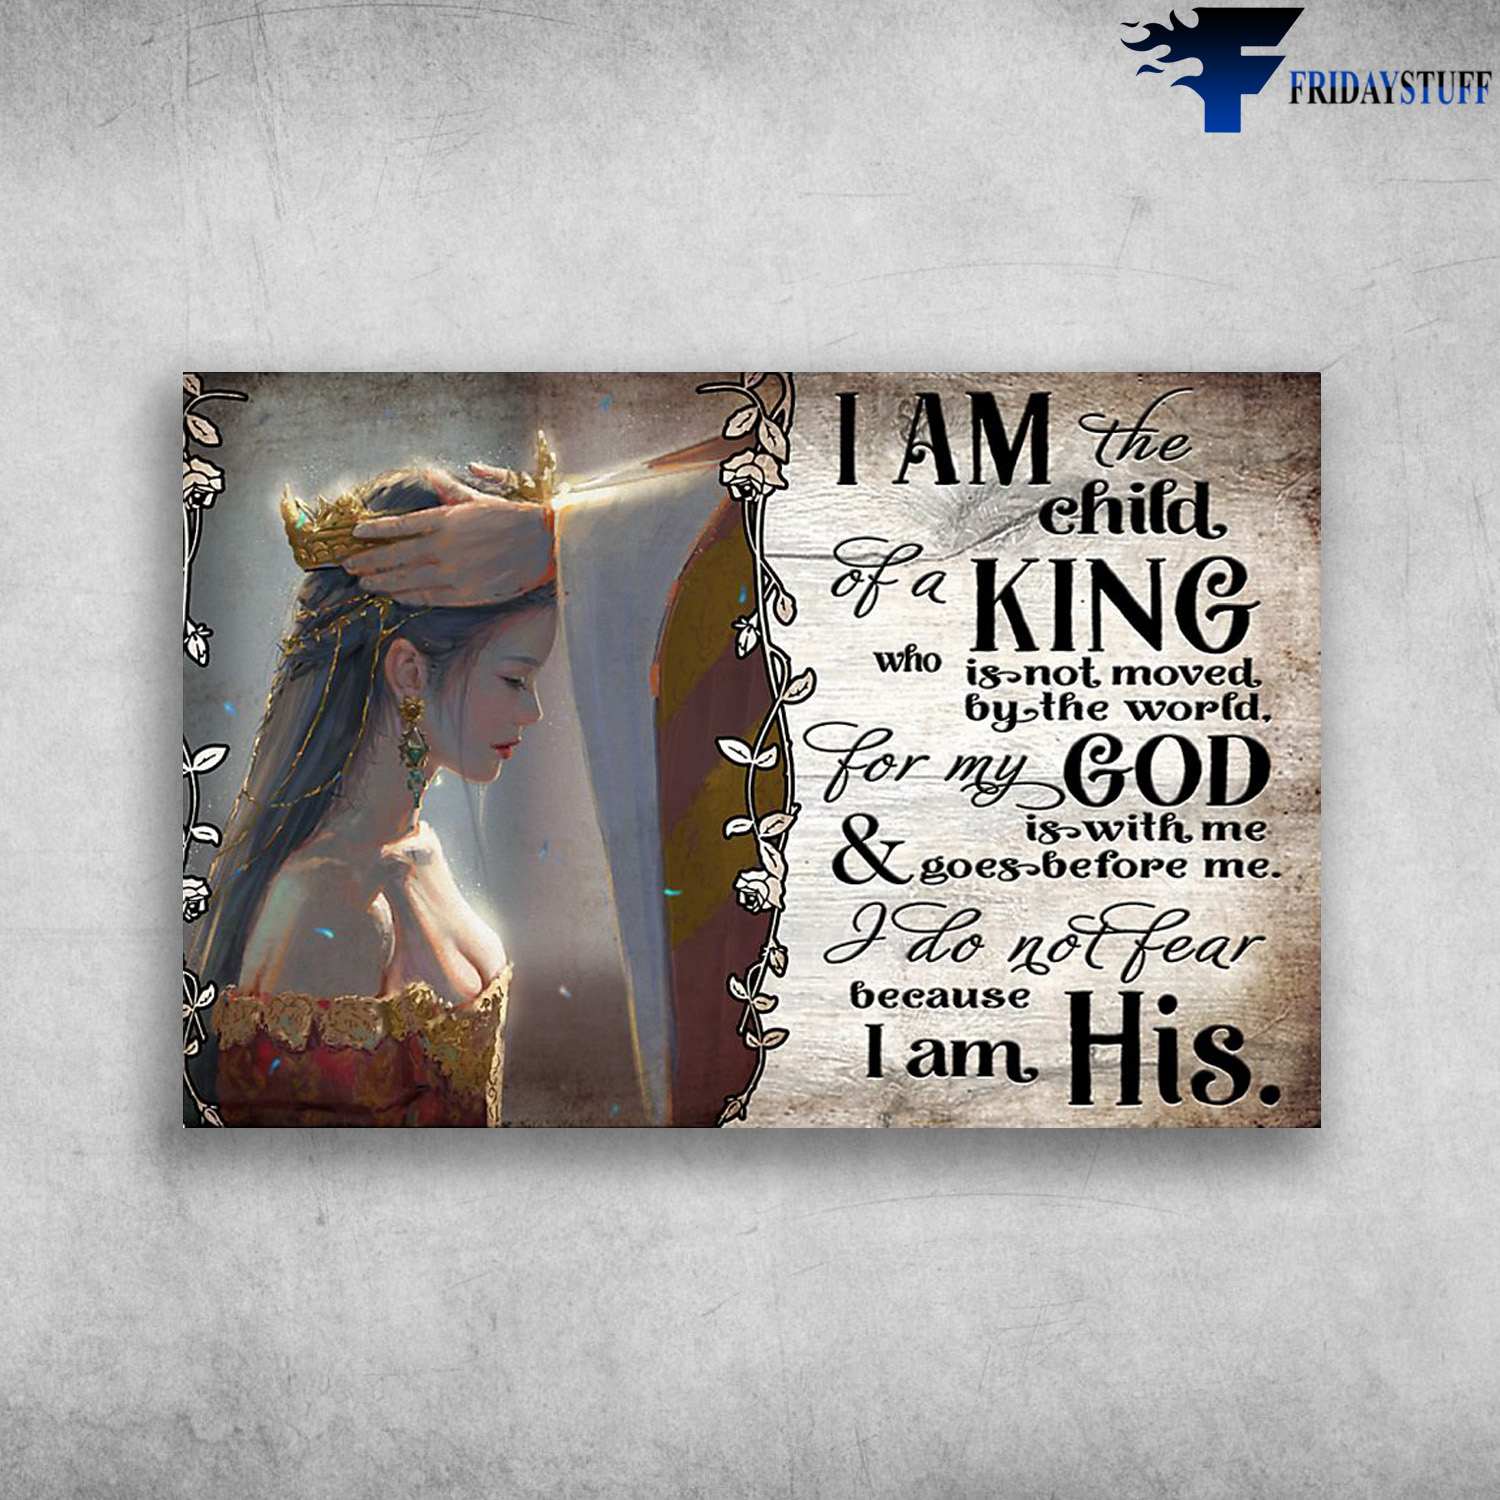 The Princess Is Wearing The Crown - I Am The Child Of A King, Who Is Not Moved By The World For My God Is With Me And Goes Before Me And Goes Before Me, I Do Not Fear Because I Am His